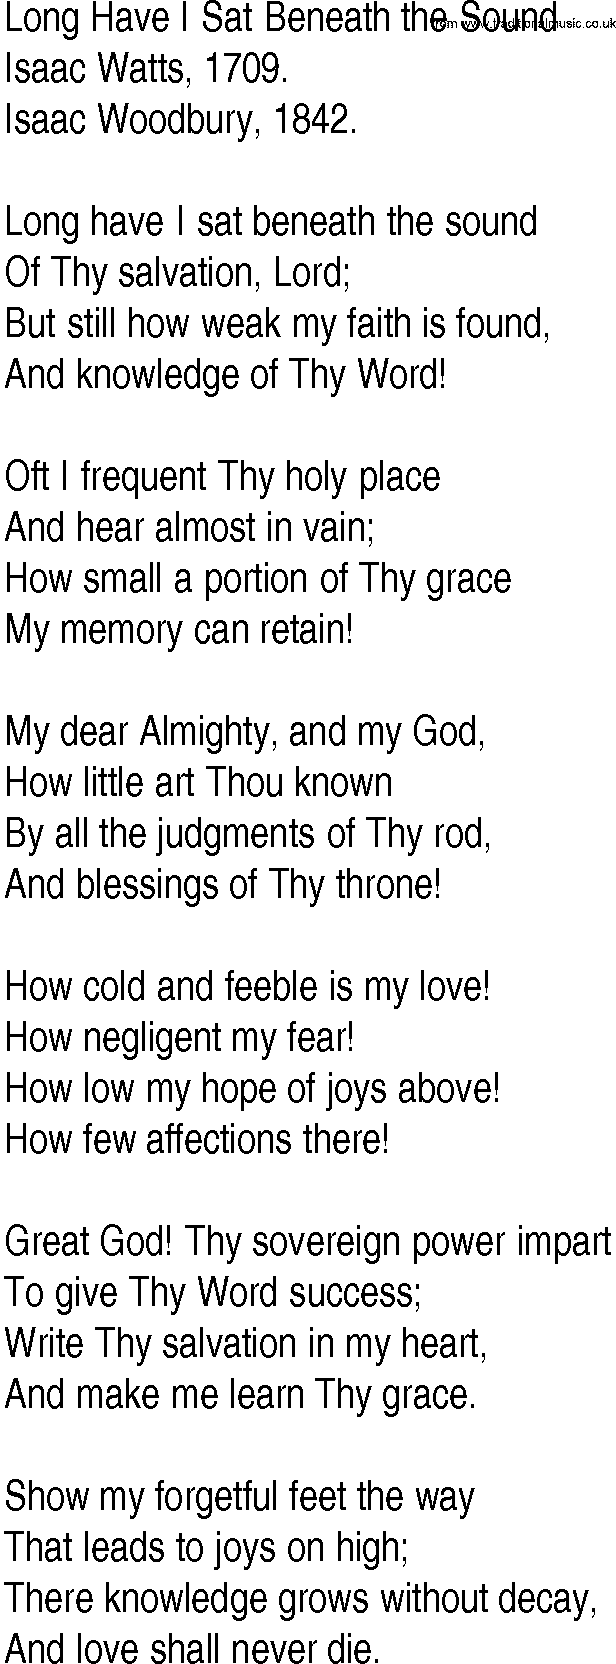 Hymn and Gospel Song: Long Have I Sat Beneath the Sound by Isaac Watts lyrics